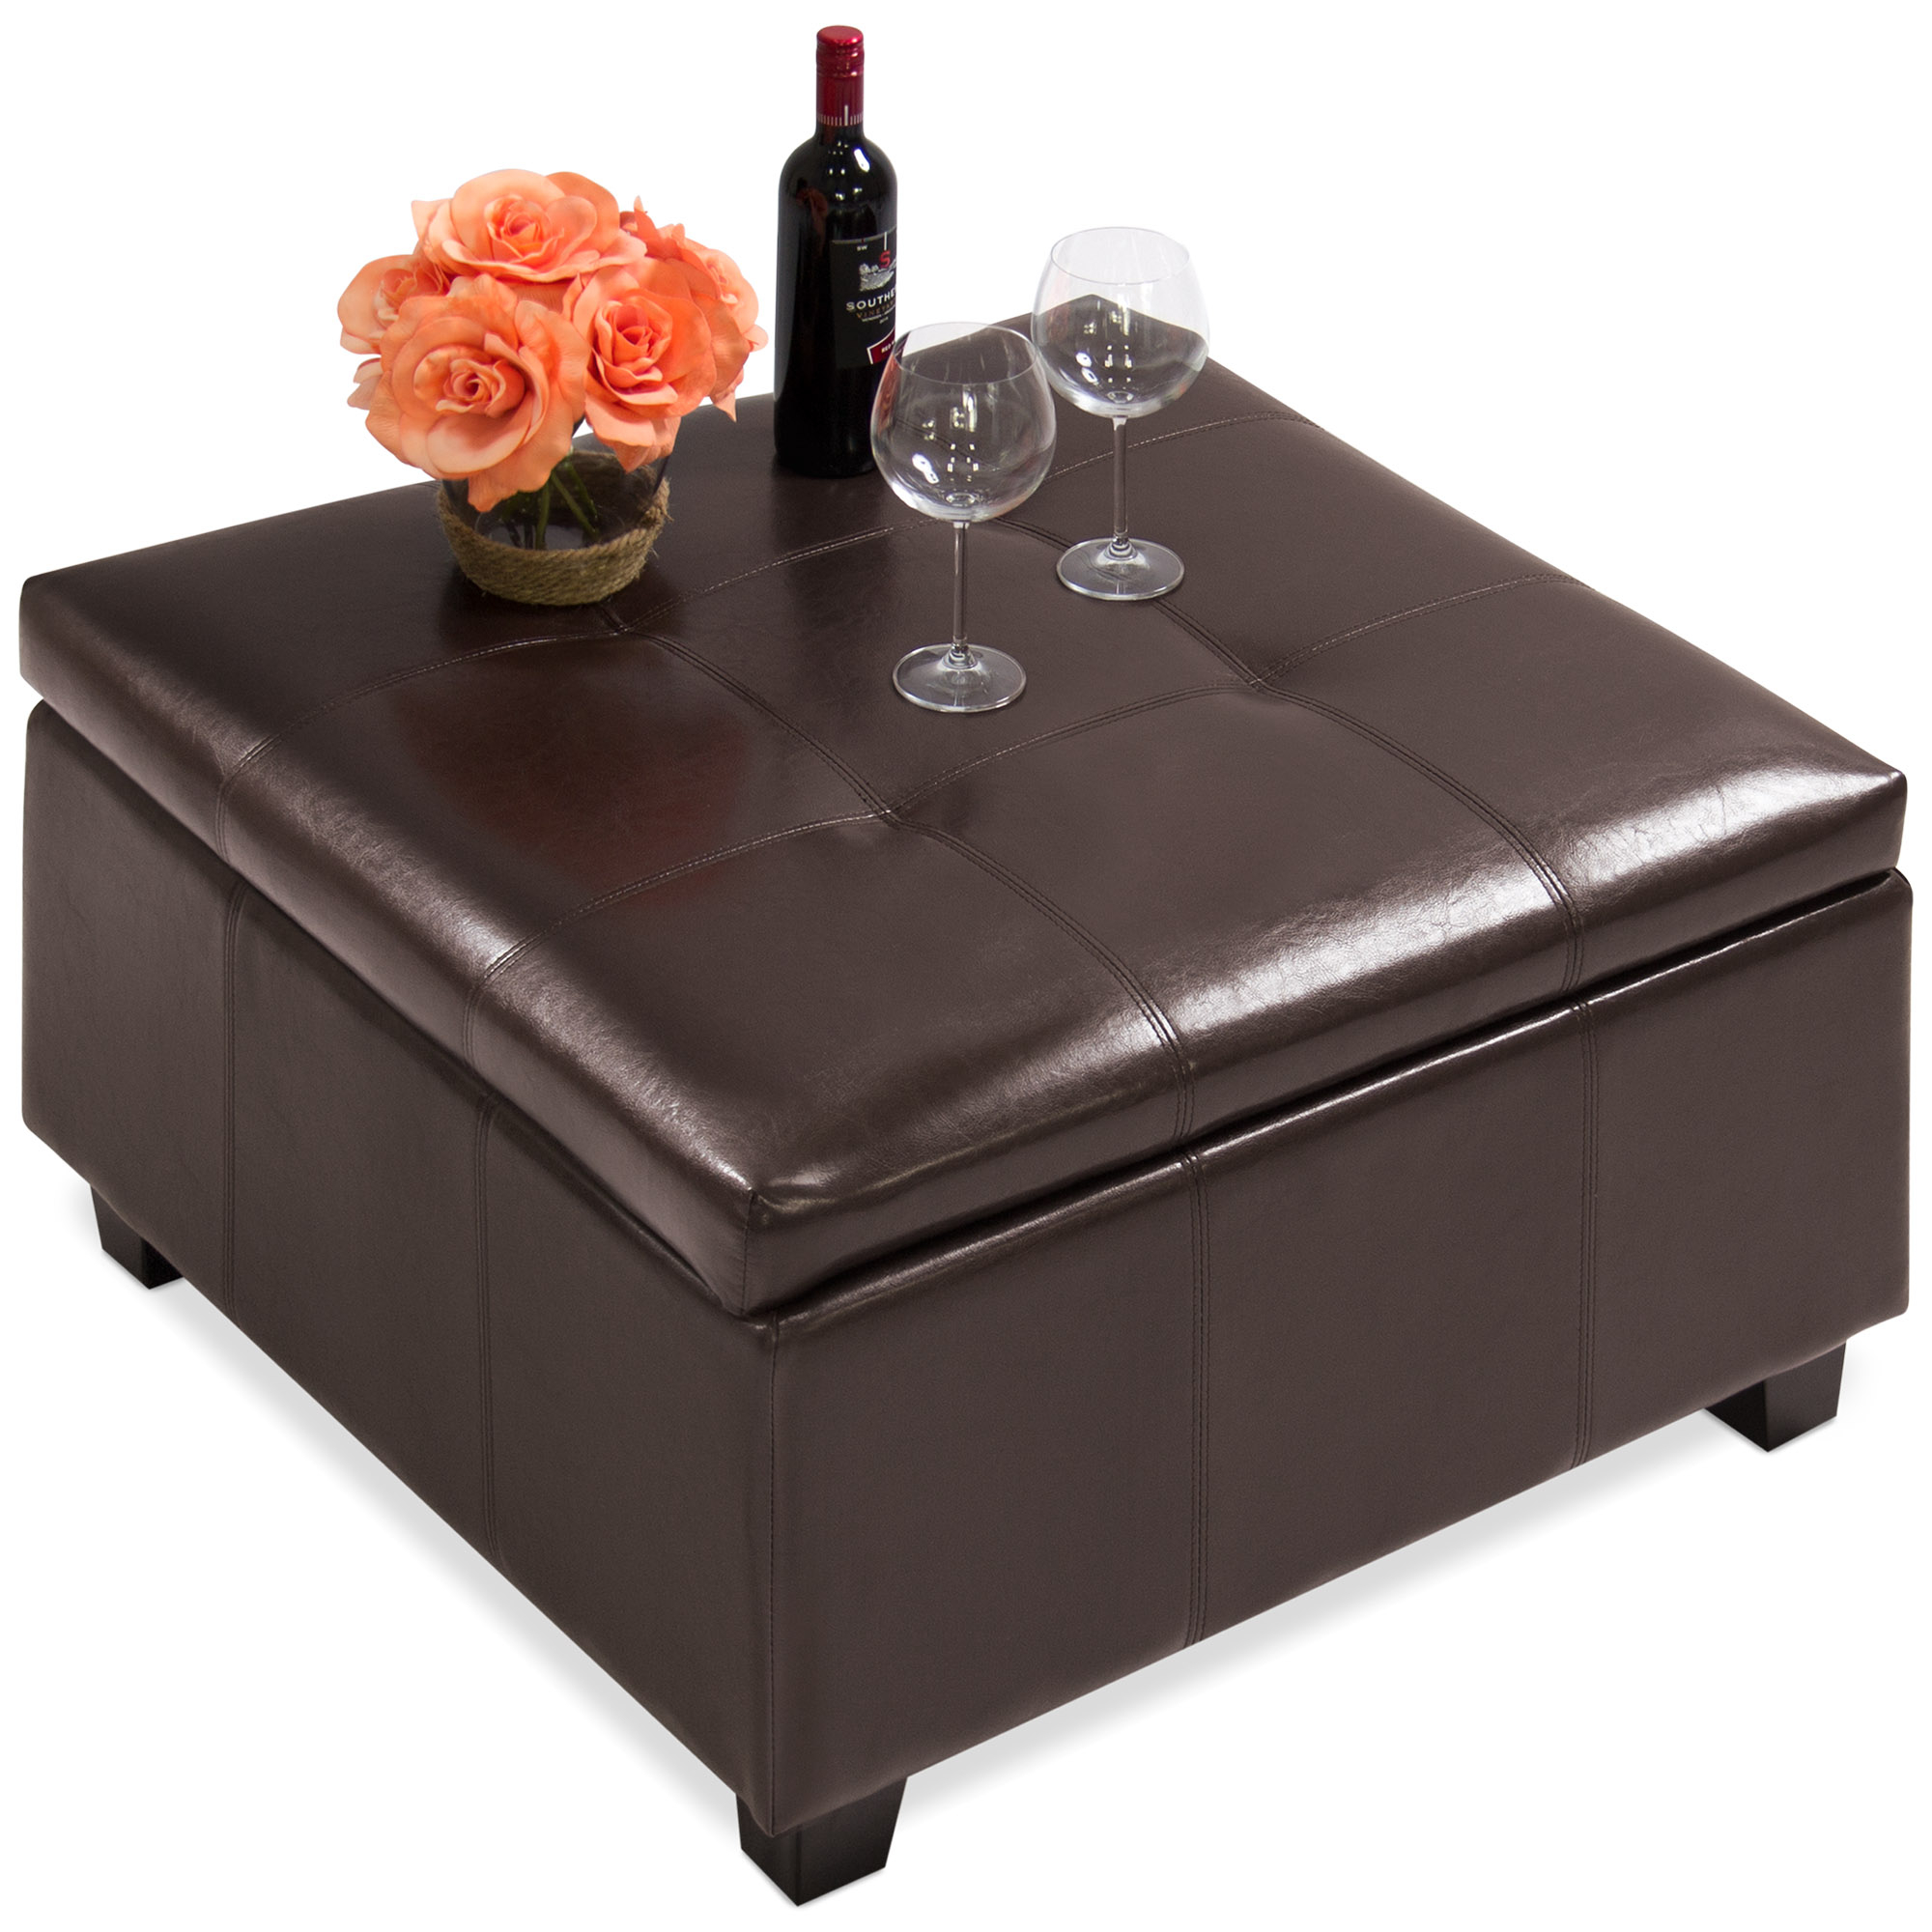 Square Leather Ottoman Coffee Table, Large Square Leather Ottoman With Storage